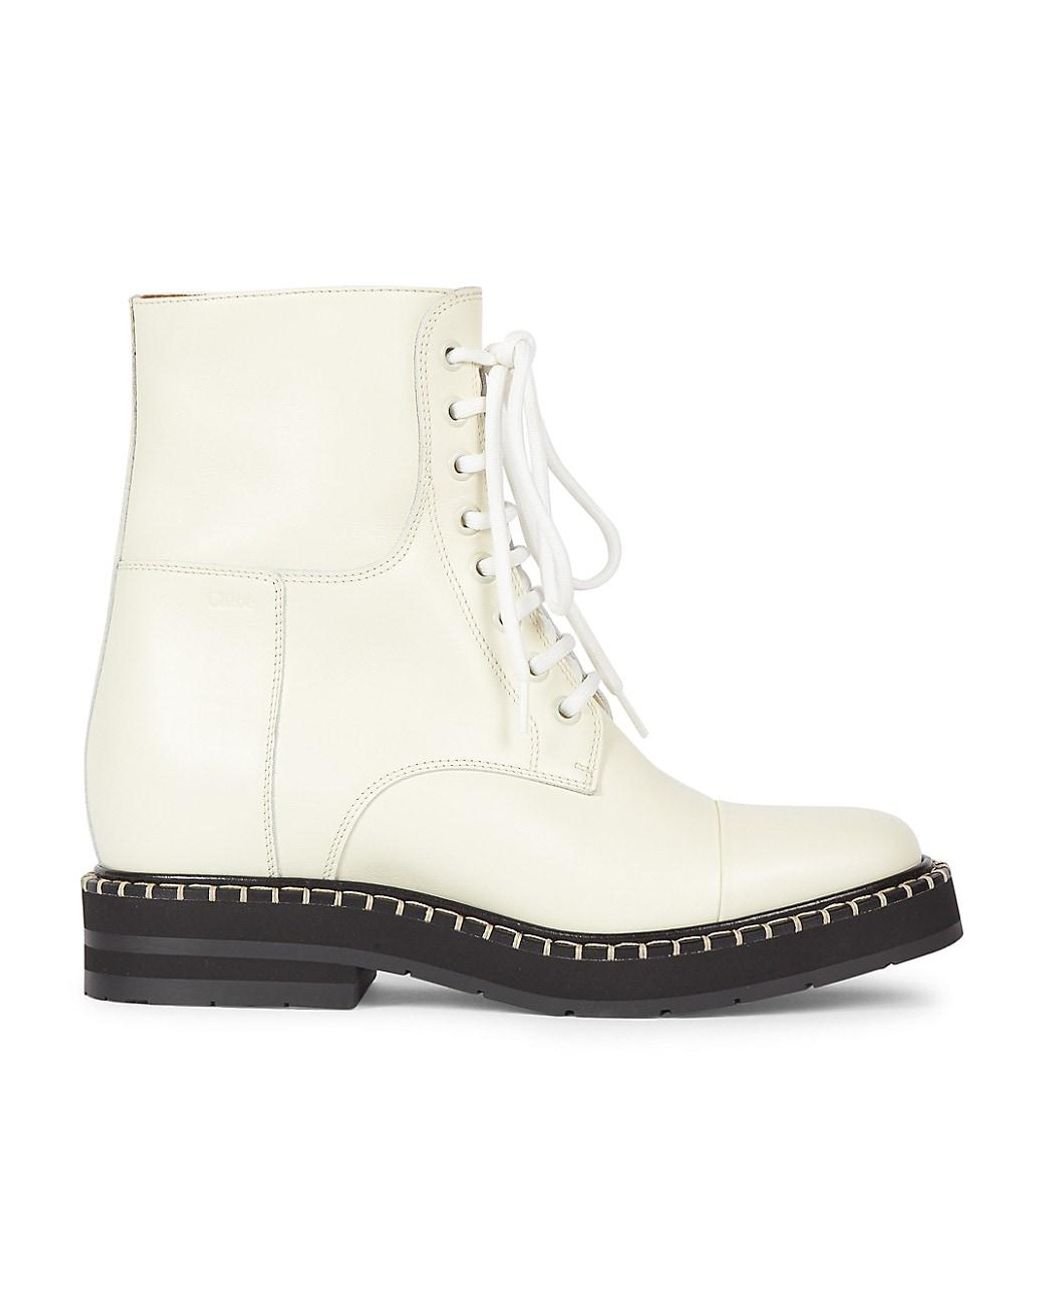 Chloé Noua Leather Lace-up Short Boots in Eggshell (White) | Lyst